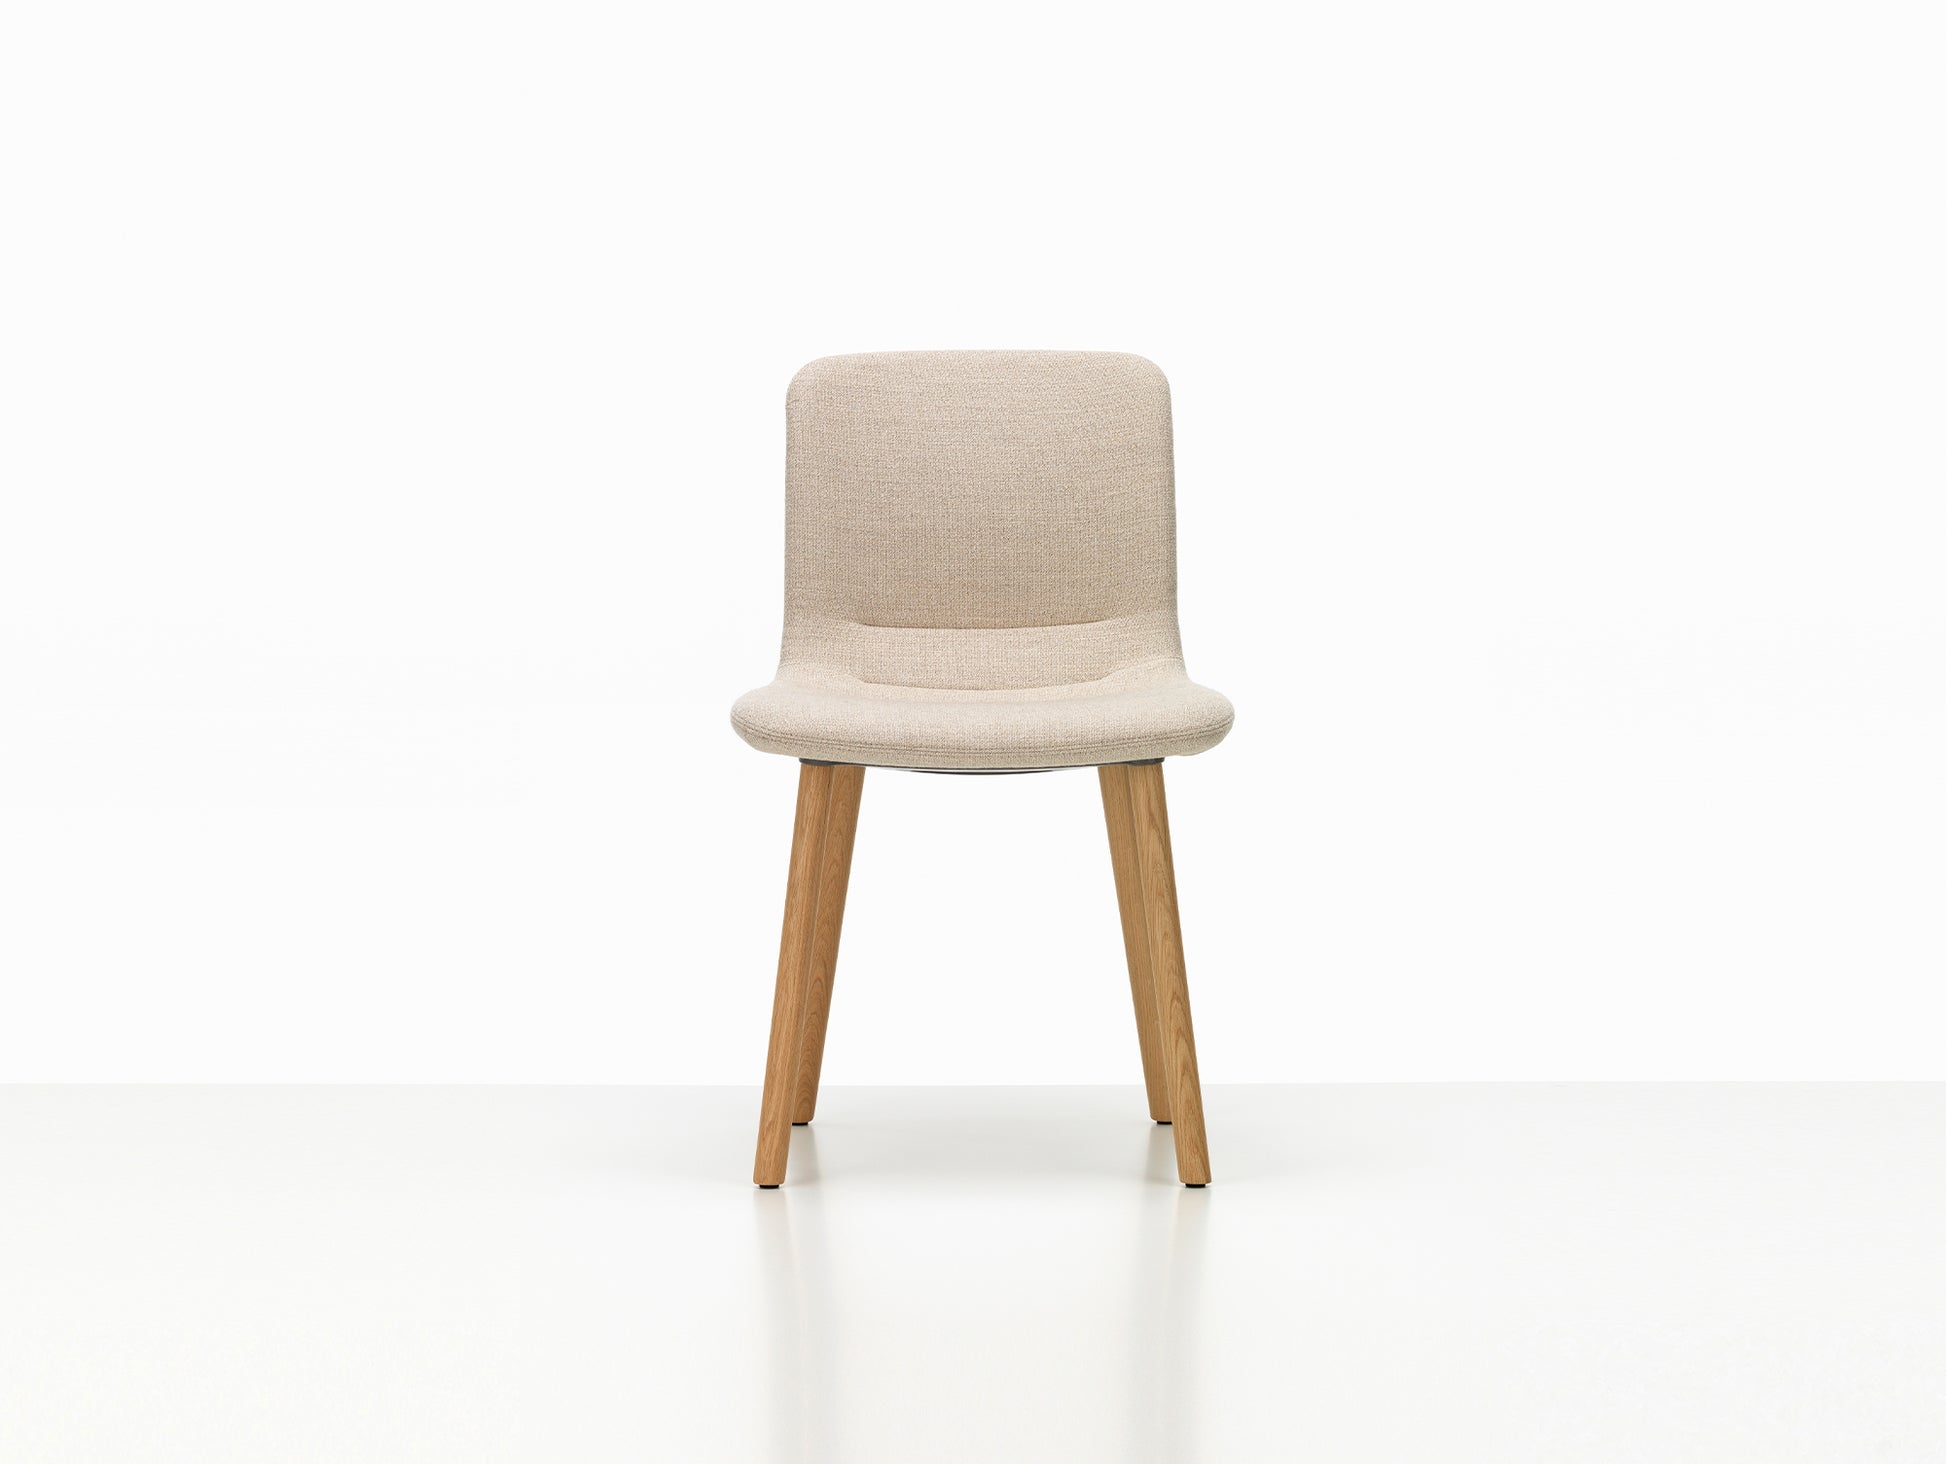 HAL Soft Wood Chair by Vitra - Natural Oak Base - Plano 03 Parchment / Cream White (F30)